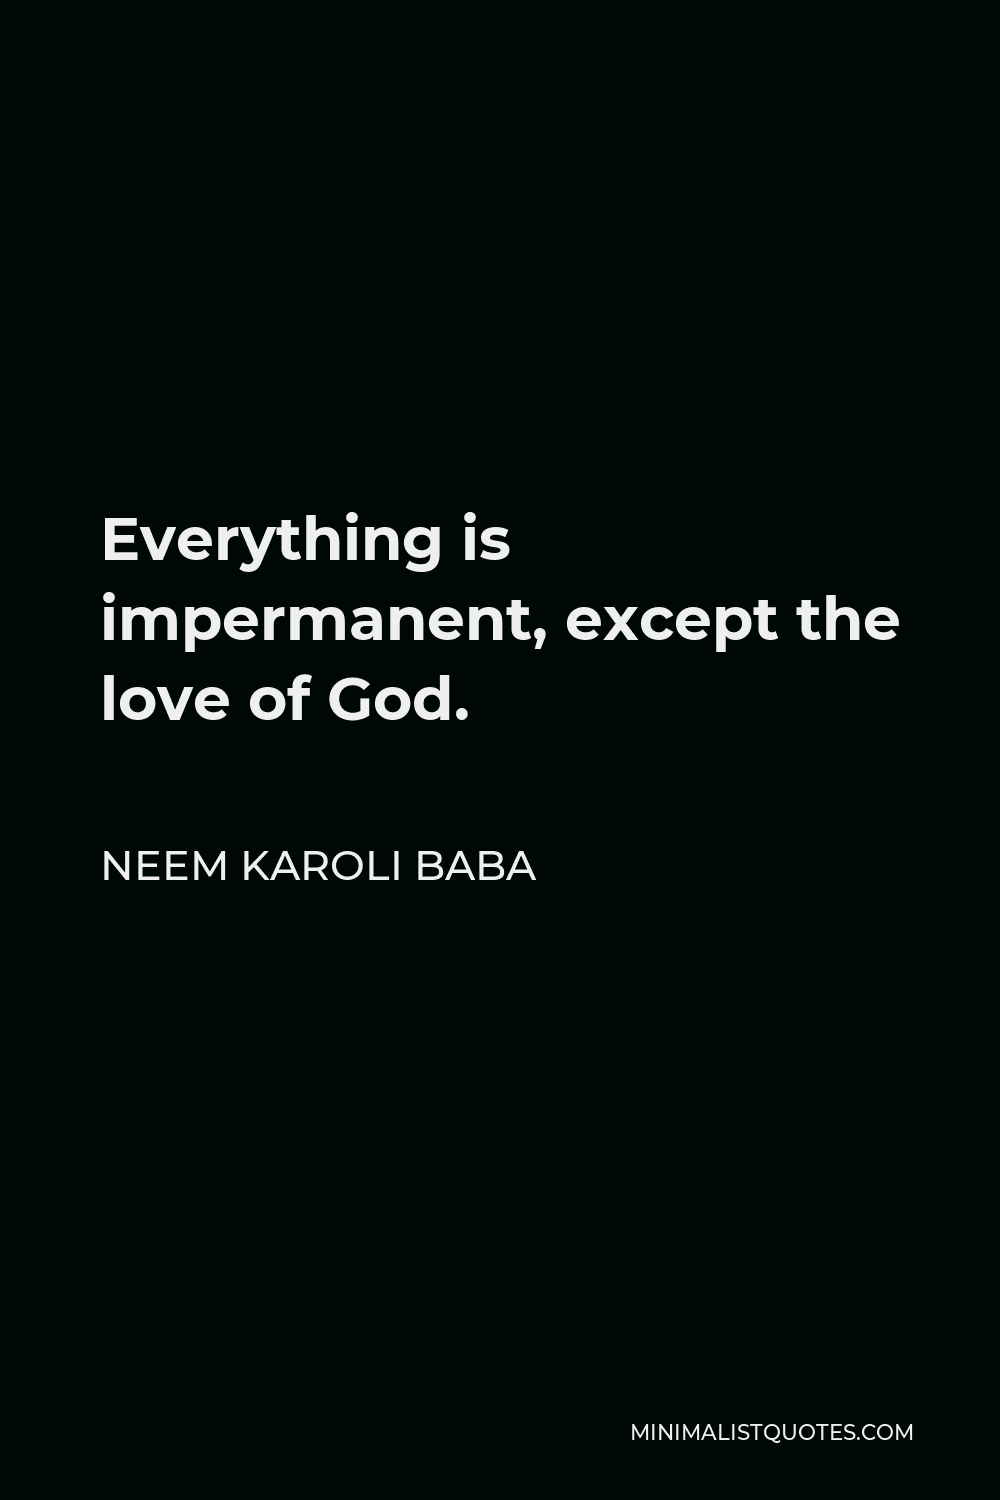 Neem Karoli Baba Quote - Everything is impermanent, except the love of God.